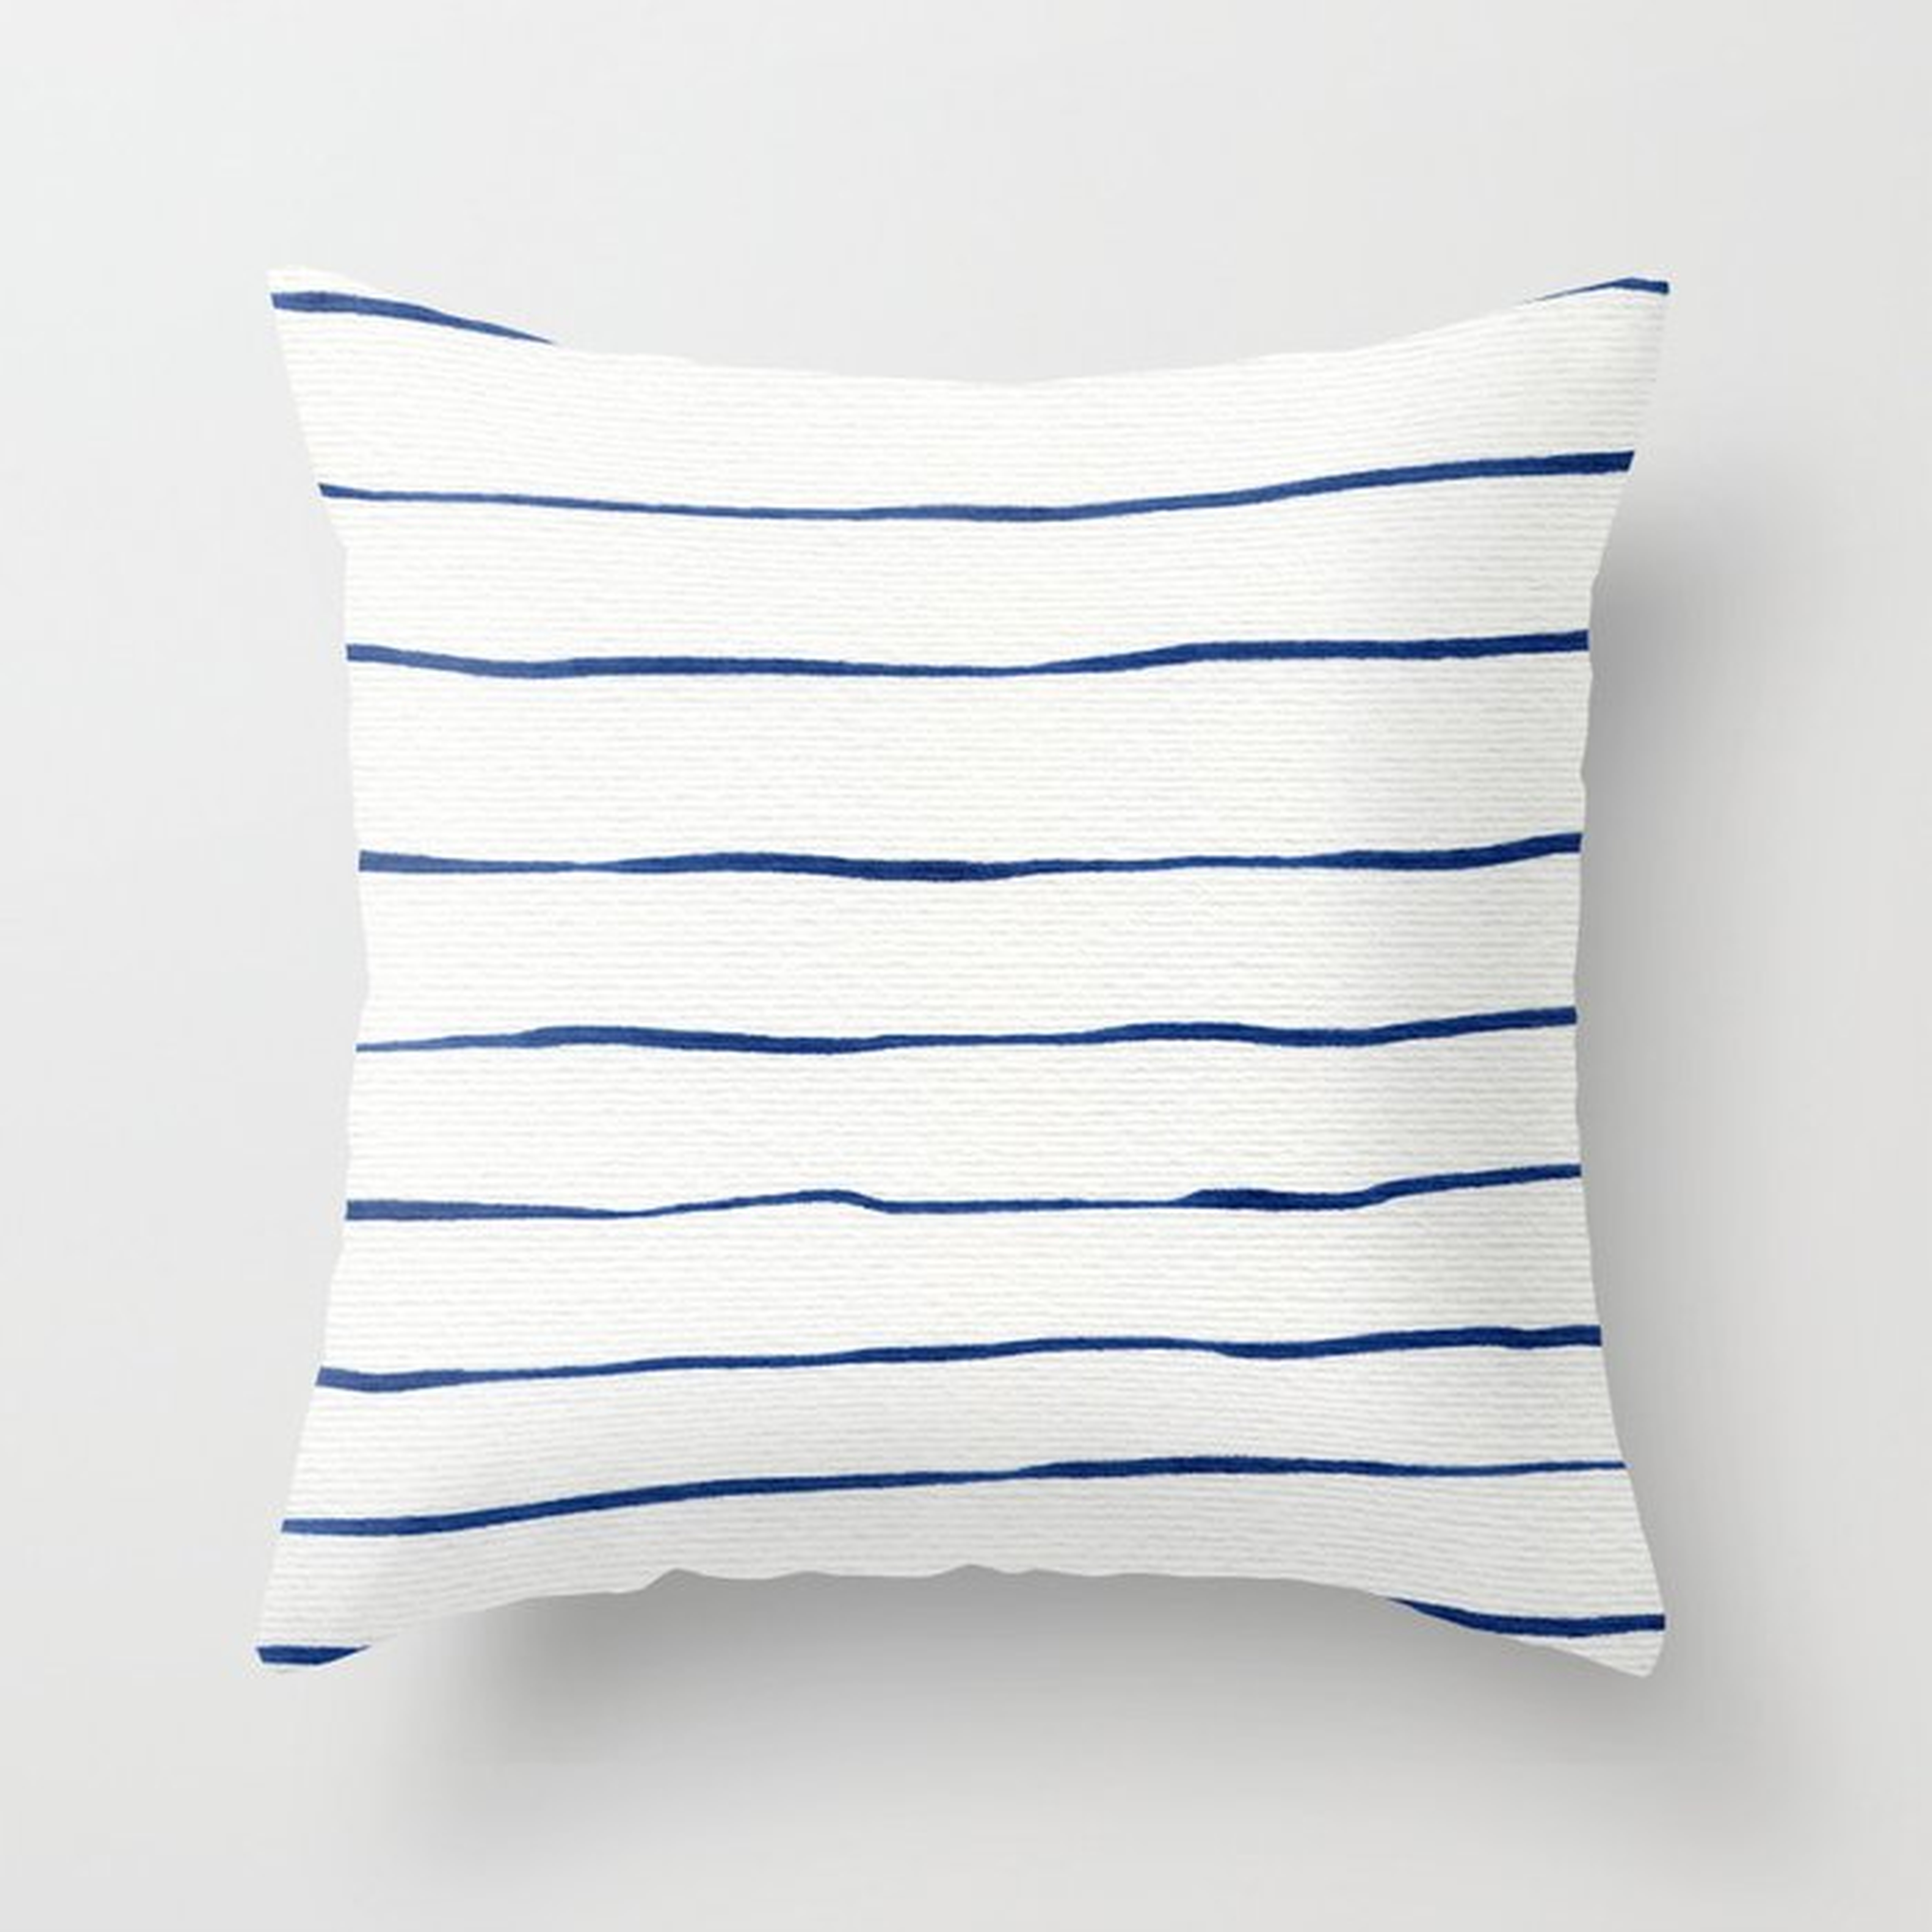 Blue Stripes Couch Throw Pillow by Georgiana Paraschiv - Cover (16" x 16") with pillow insert - Indoor Pillow - Society6